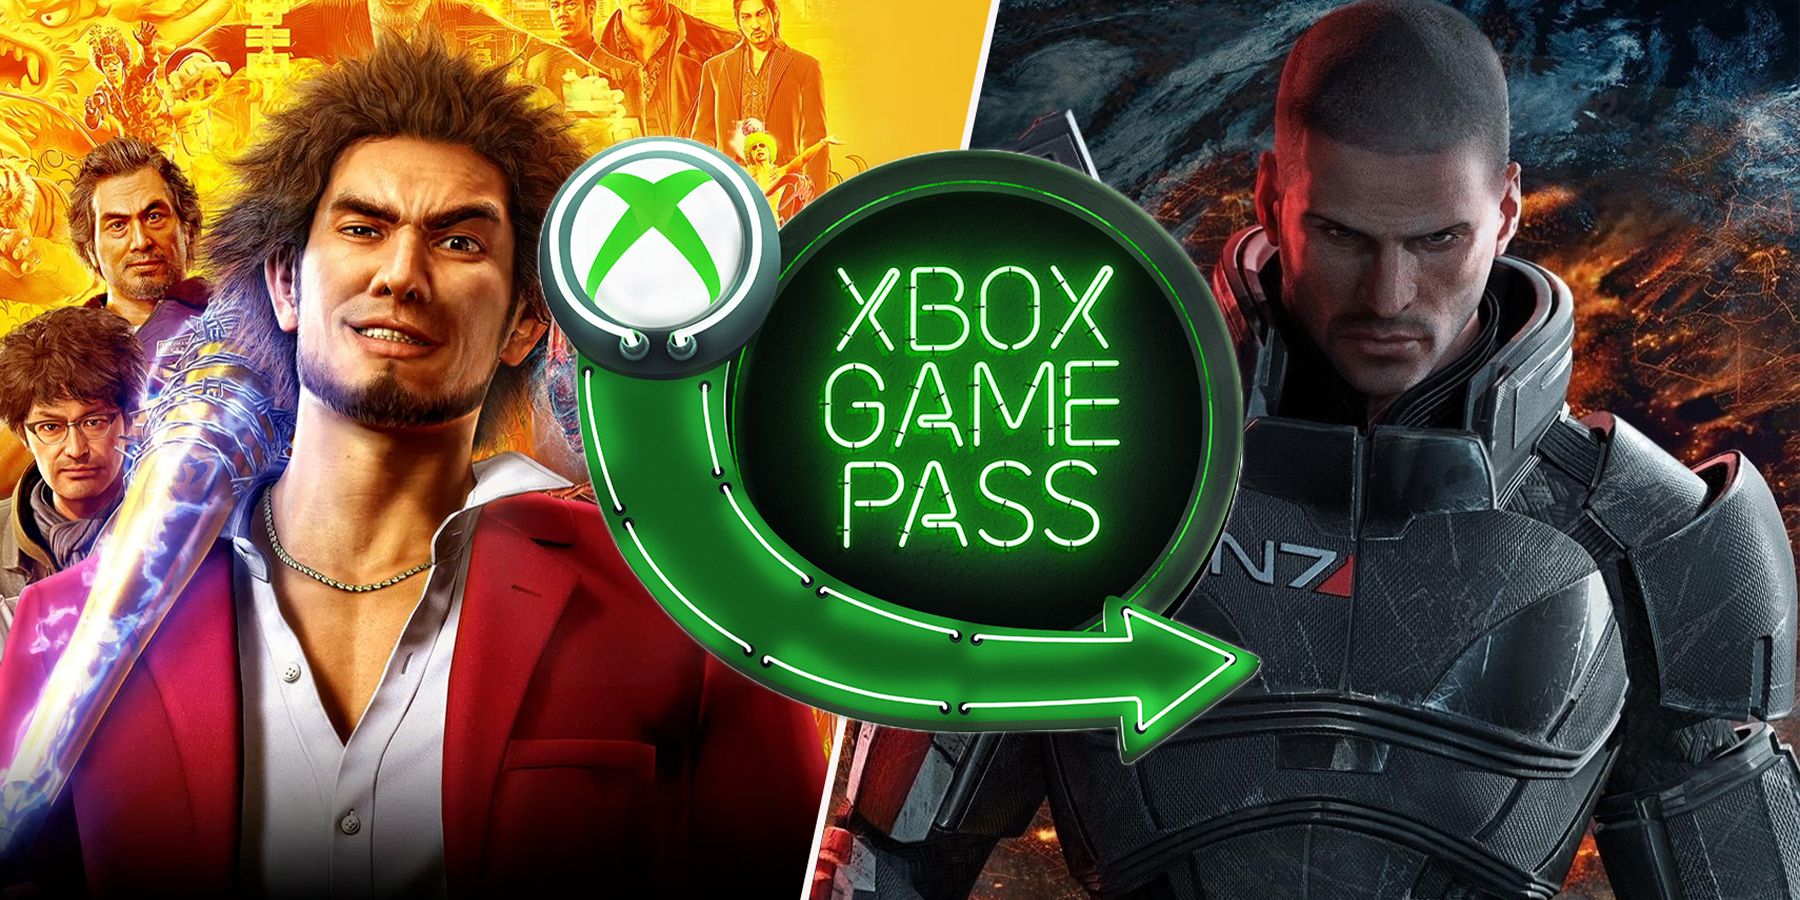 The 15 Best RPGs Added To Xbox Game Pass Games In 2020 (According To  Metacritic)